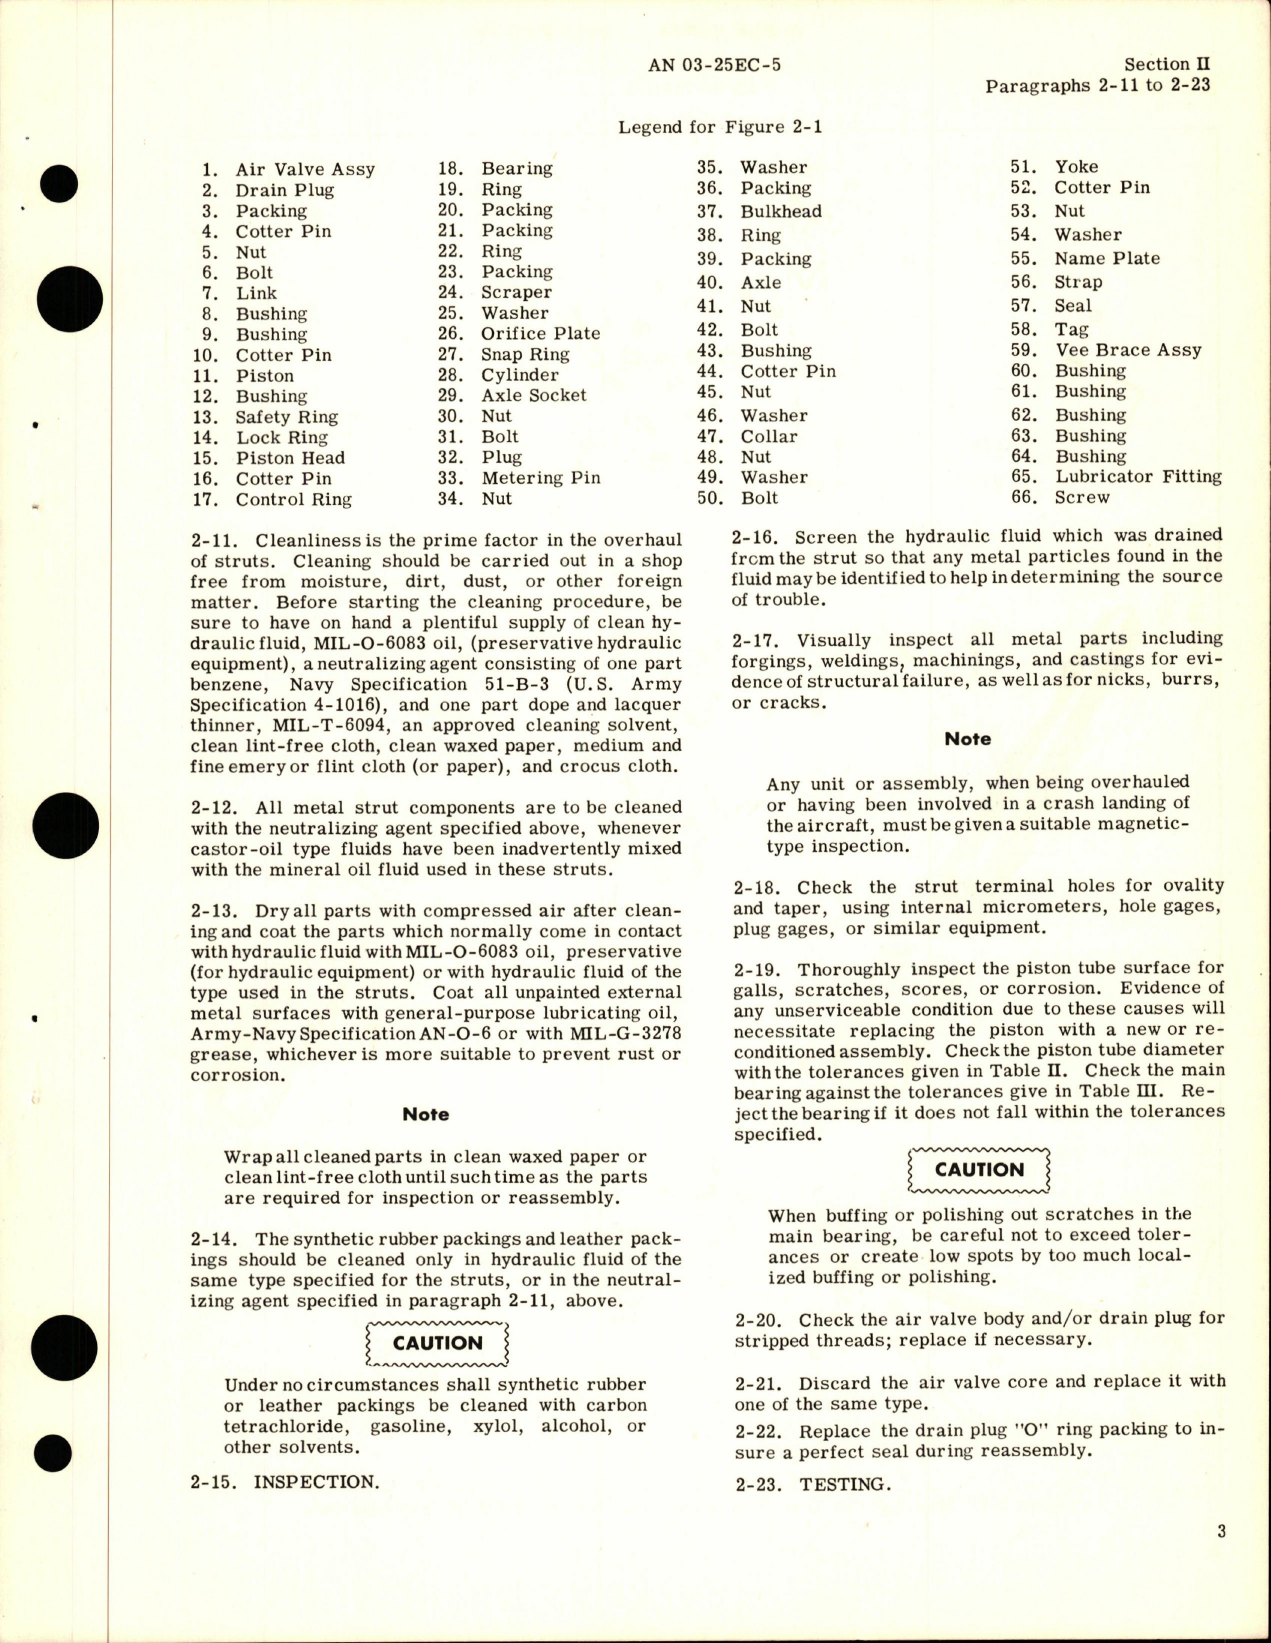 Sample page 7 from AirCorps Library document: Overhaul Instructions for Main Landing Gear Installation and Tail Landing Gear Strut Assembly - 76-200 and 76-03 